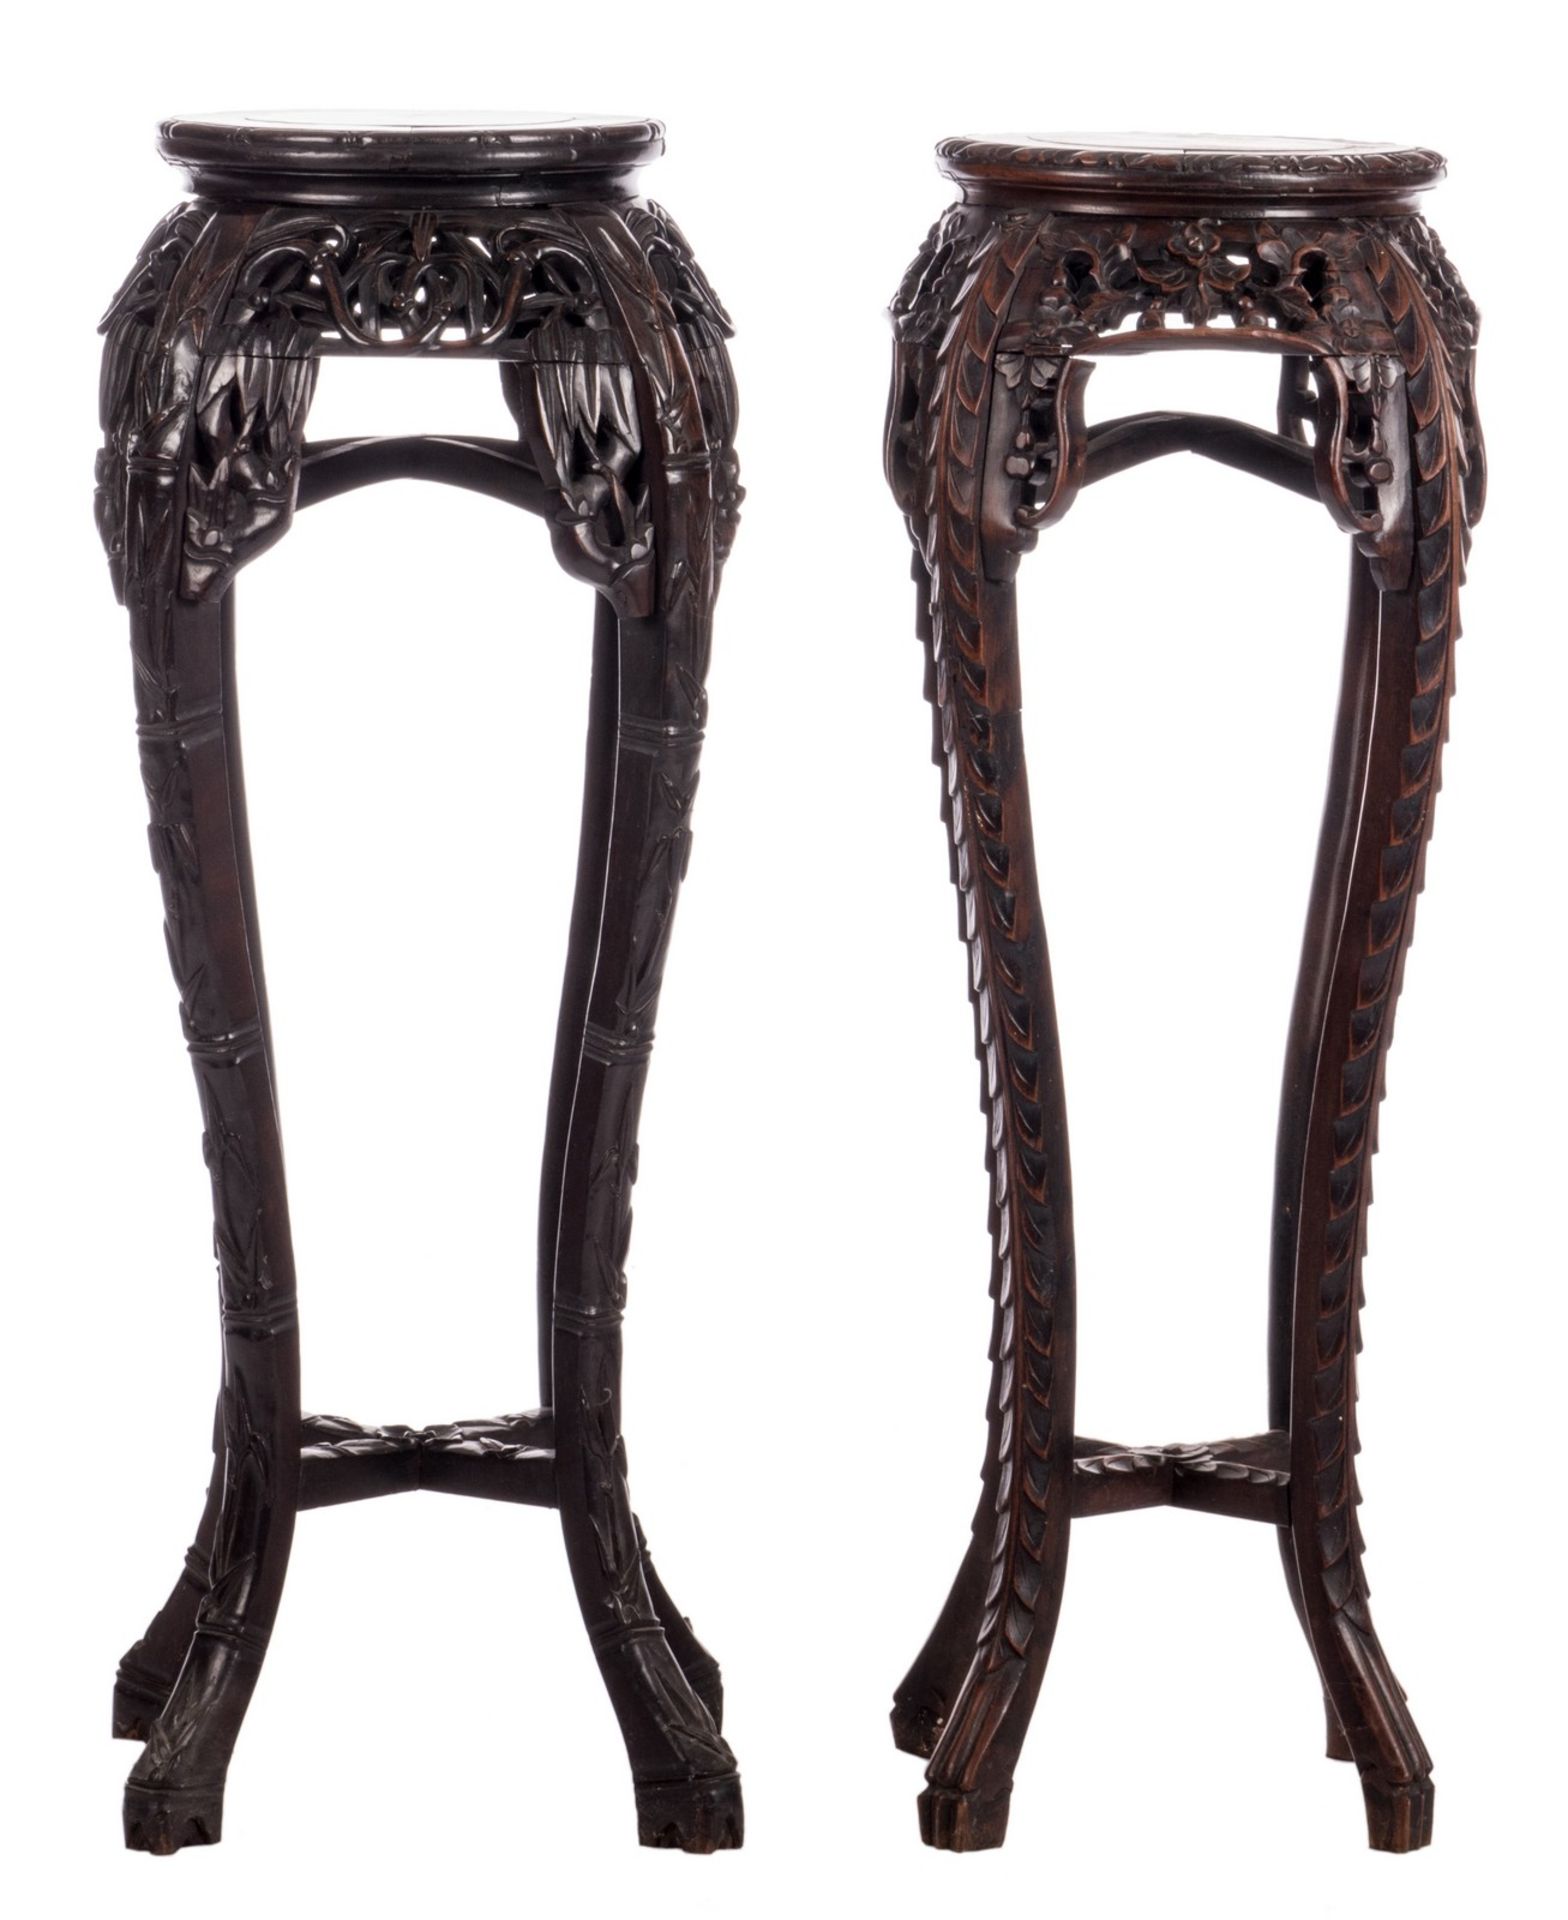 Two Chinese carved hardwood stools with marble top, about 1900, H 91 - 92 cm, Diameter 39 - 41 cm (